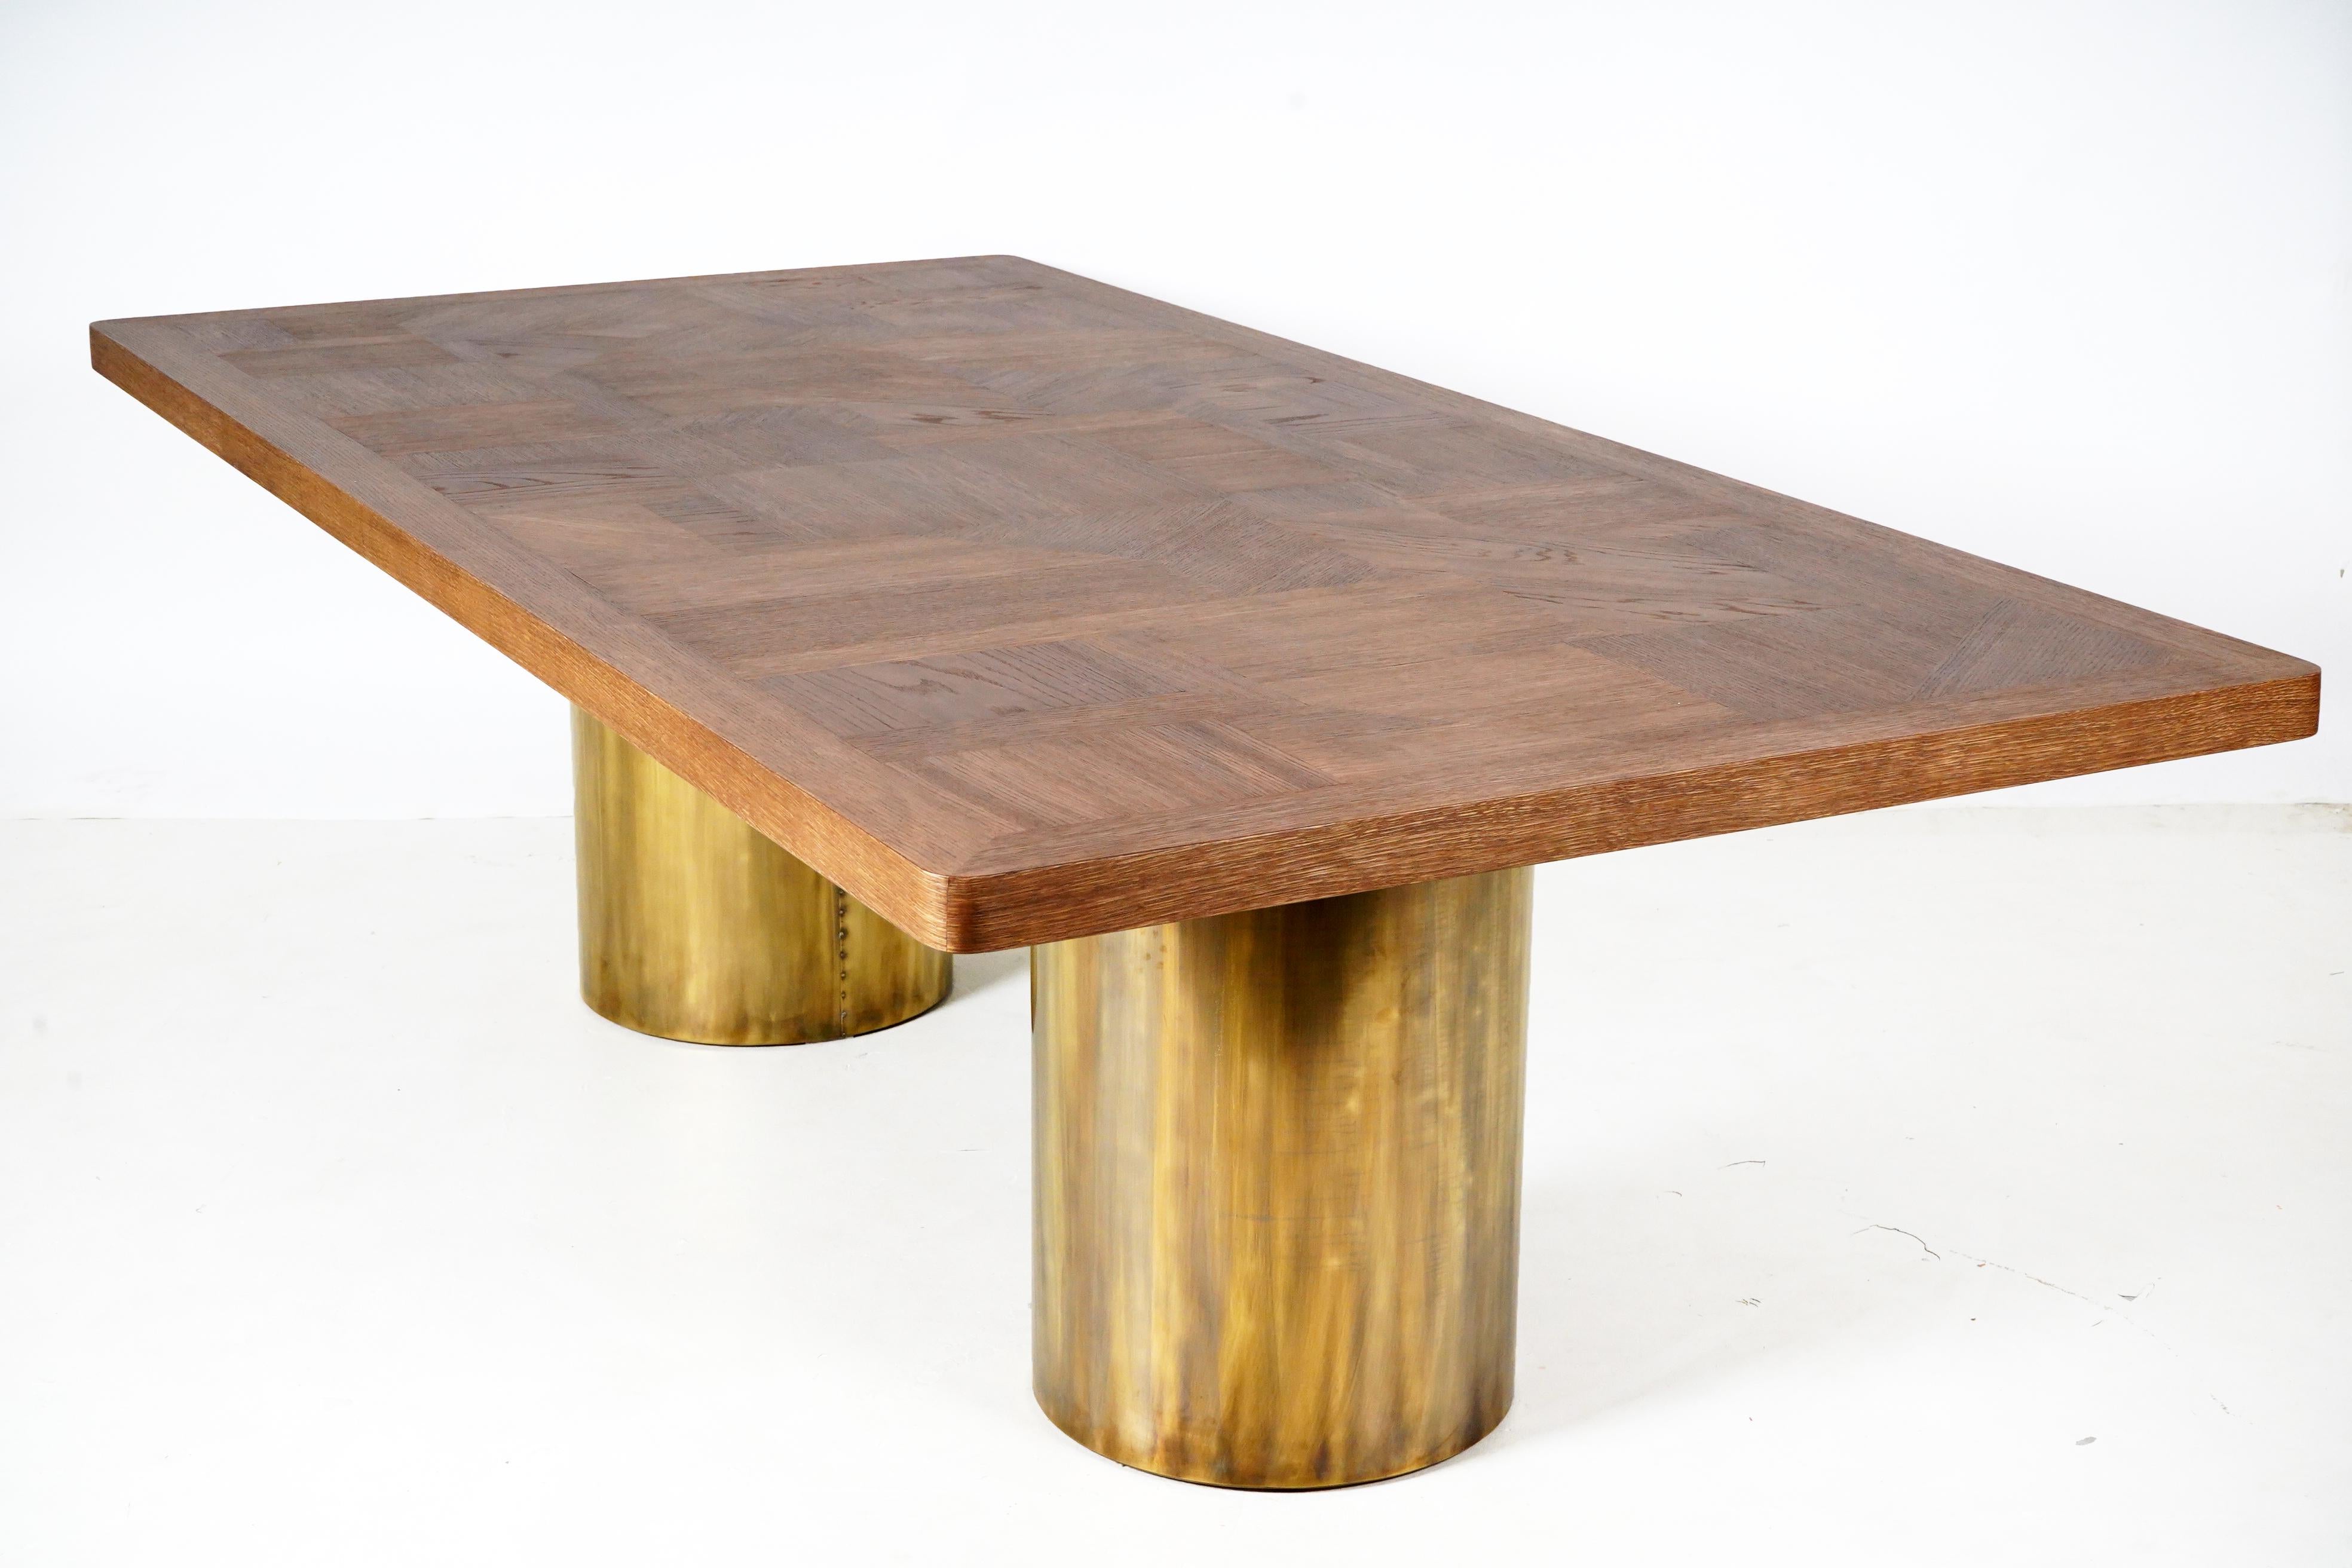 This large and sturdy oak parquet table top rests on large brass-wrapped cylinder-shaped legs. The thick oak tiles are held within a thick, solid oak frame. The top is lightly-textured with the grain left unfilled.  The unfilled grain is slightly